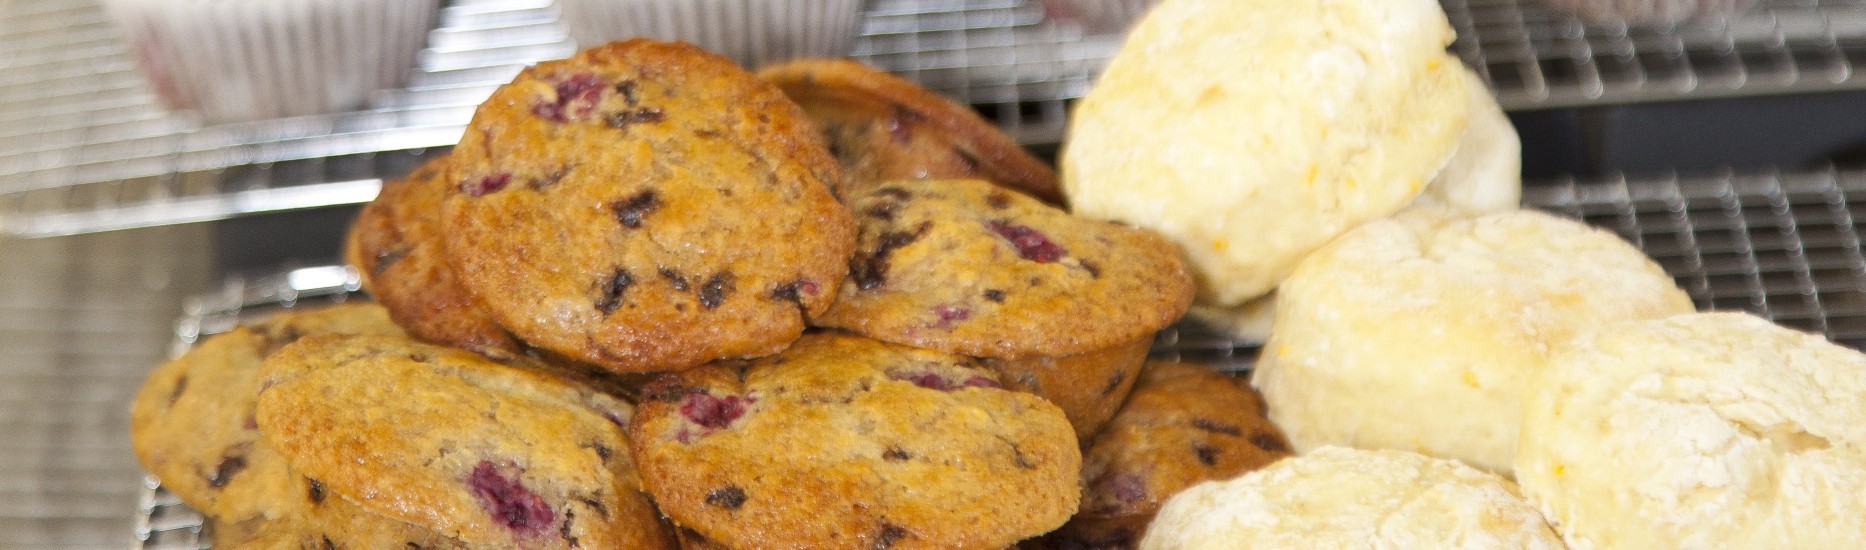 Cookies and muffins1